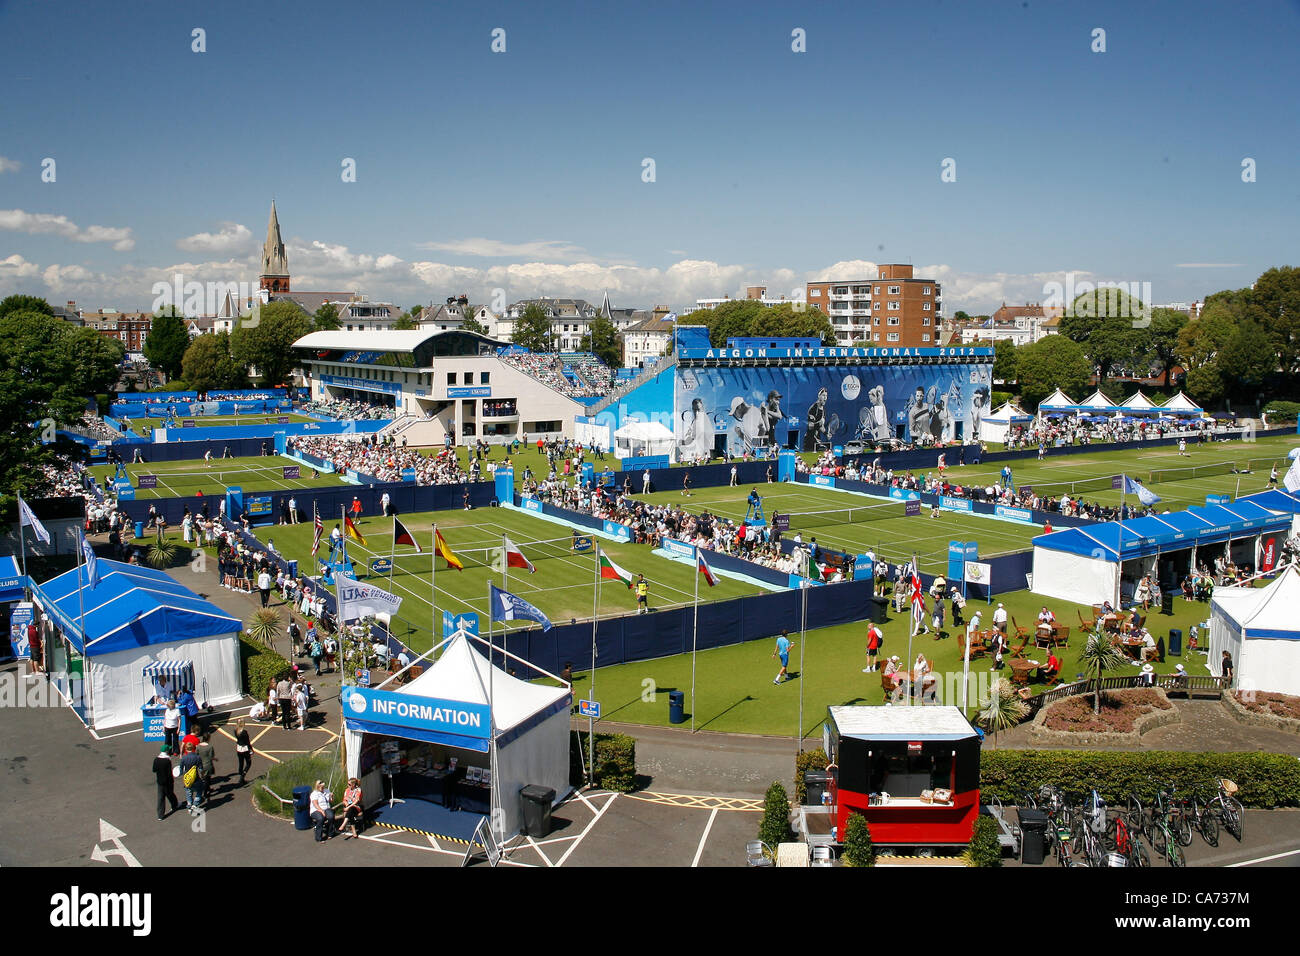 19.06.12 Devonshire Park, Eastbourne, ENGLAND:General view of the stadia and structures during the AEGON INTERNATIONAL tournament in Easterbourne June 19 2012 Stock Photo